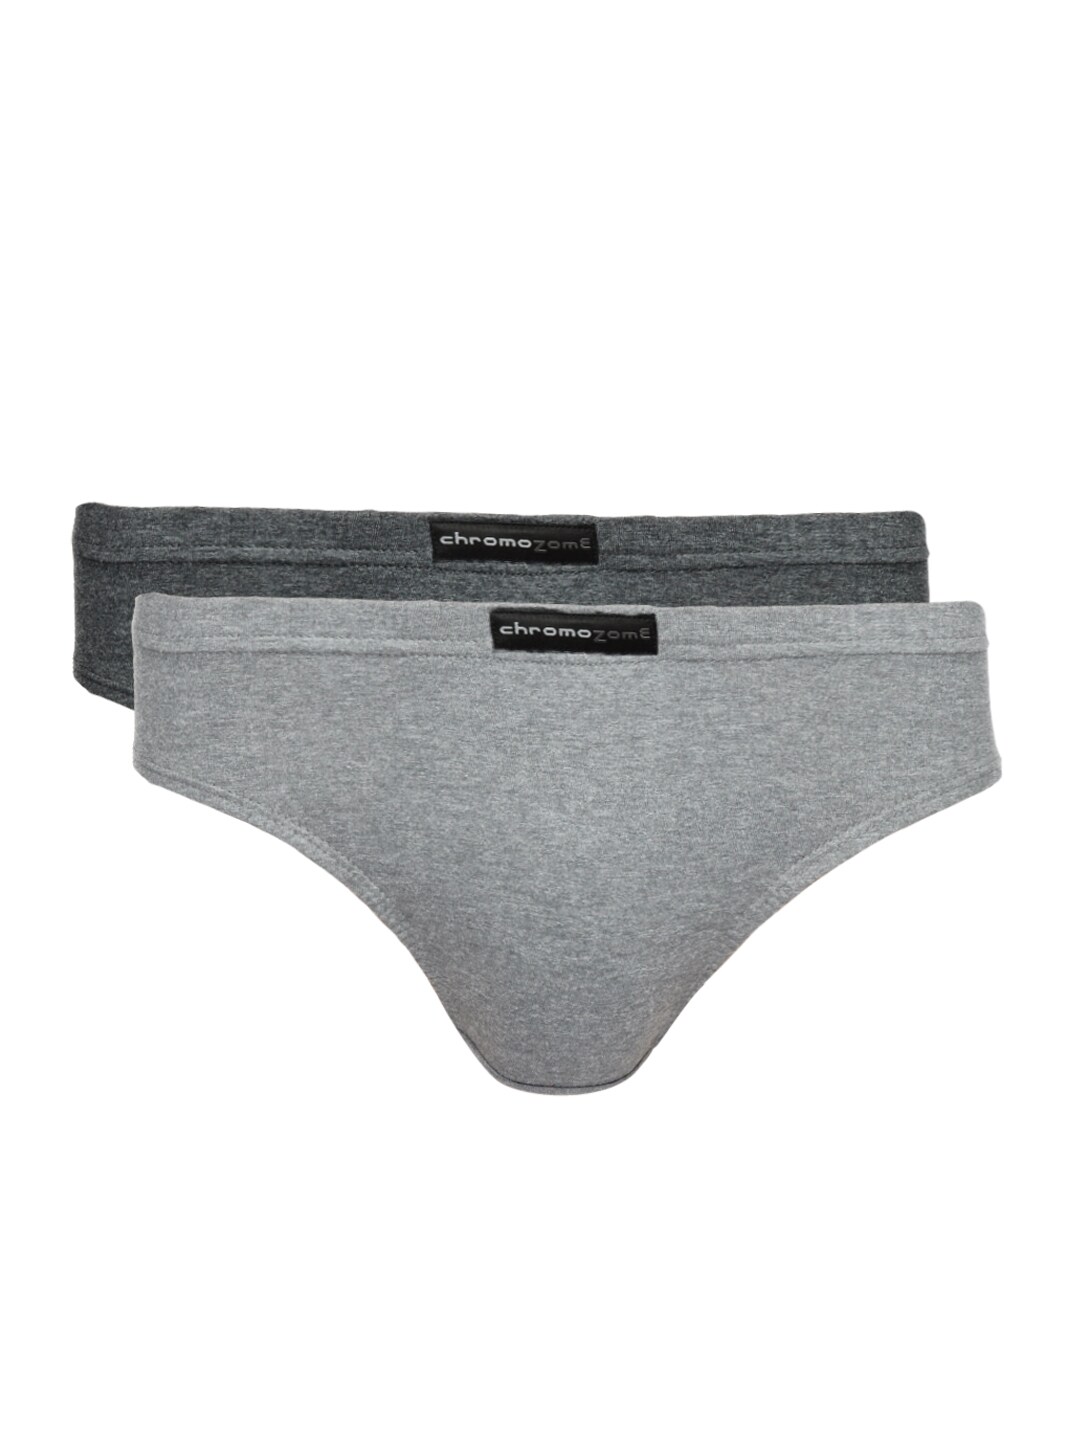 Chromozome Men Pack of Two Grey Briefs